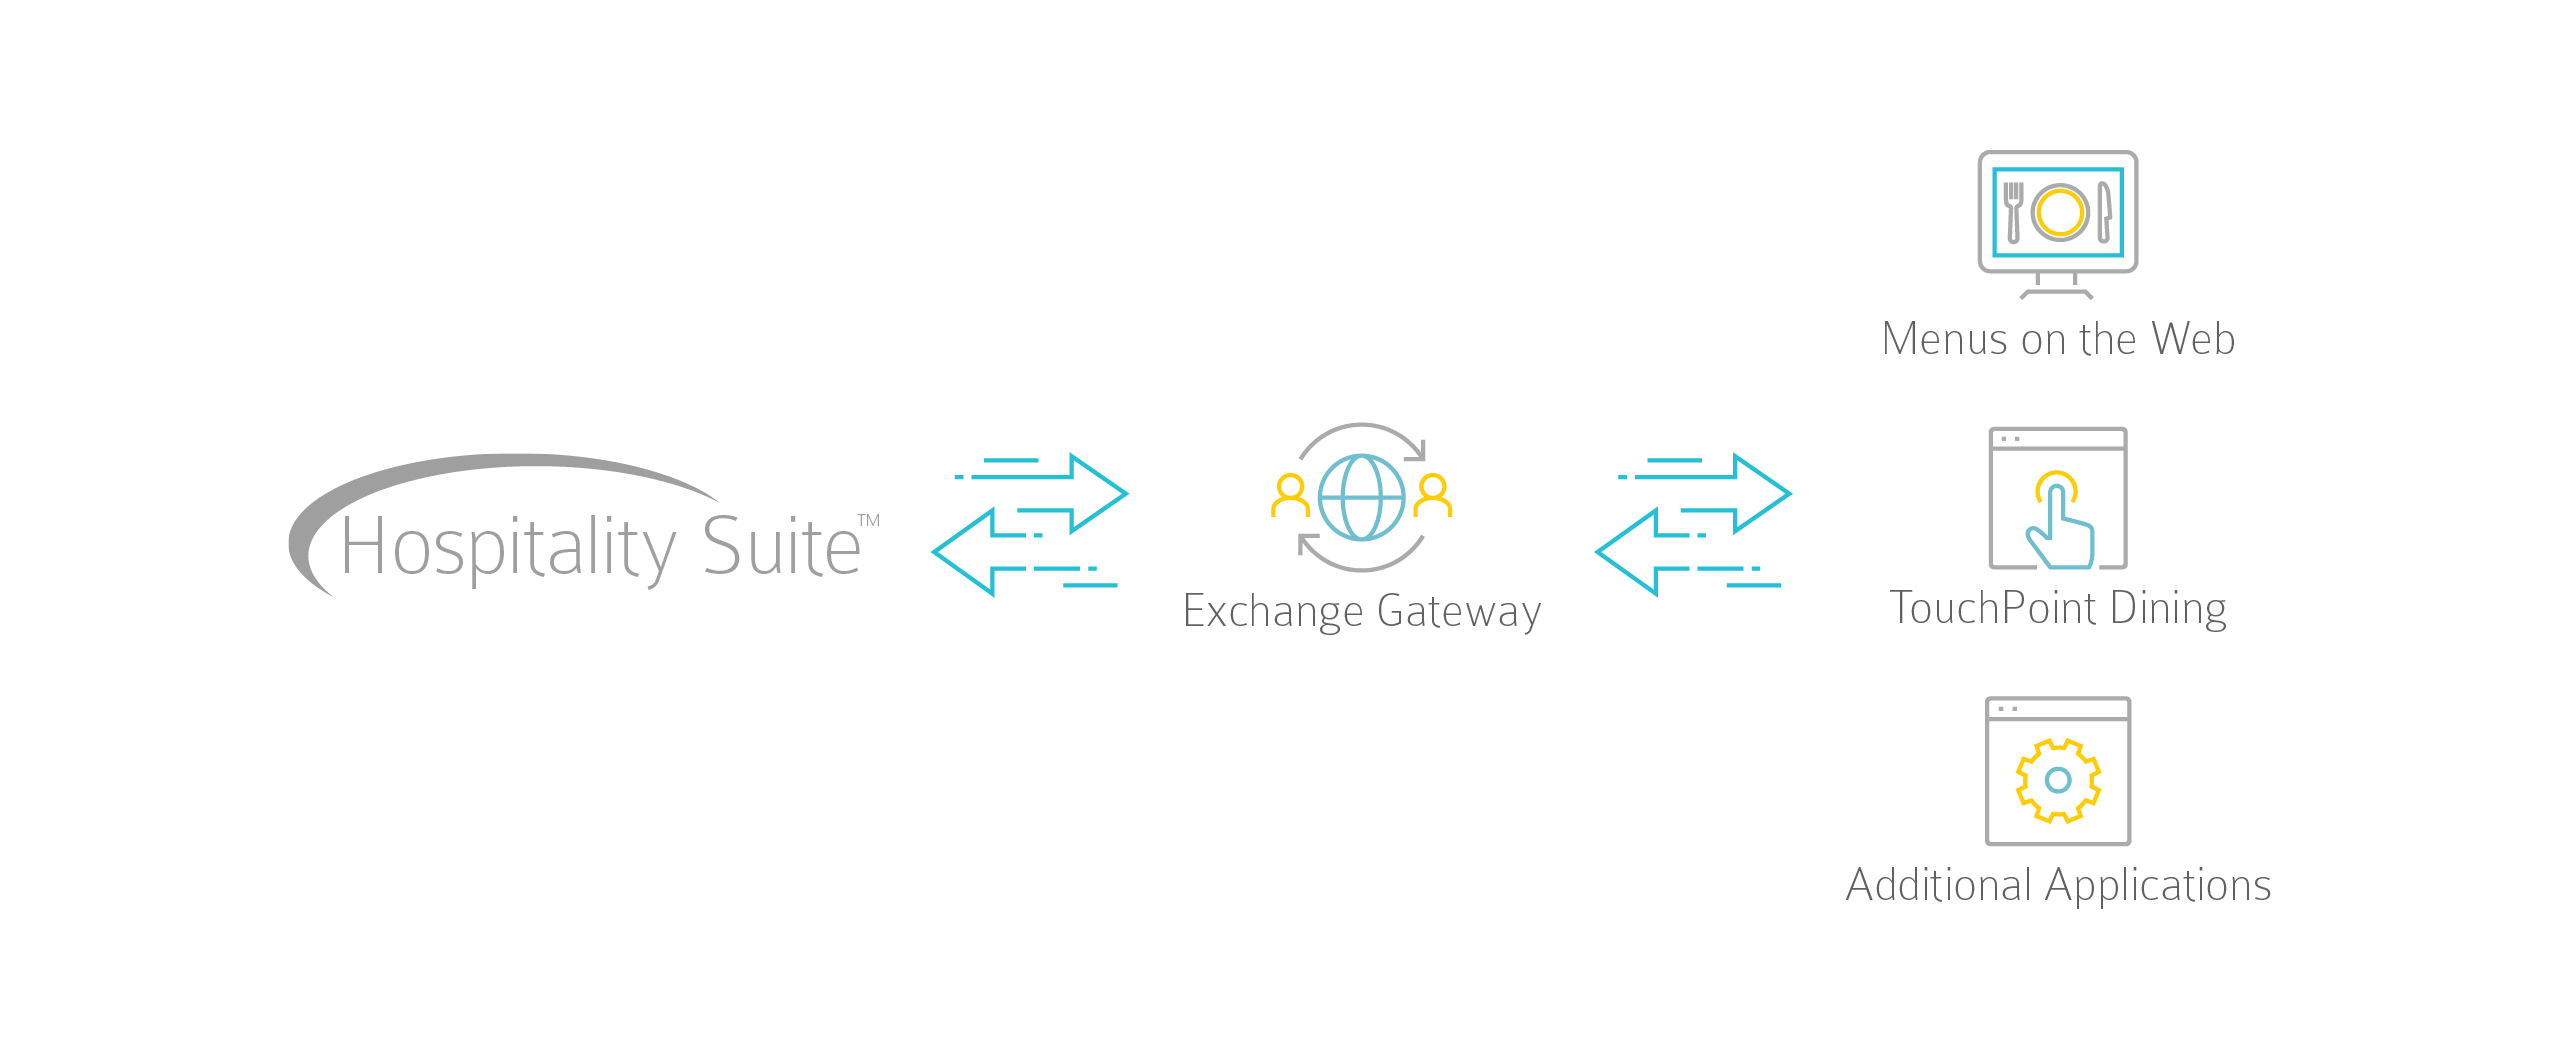 An infographic showing the XChange Gateway process. It forms the bridge between Hospitality Suite, Menus on the Web, TouchPoint Dining, and Additional Applications.